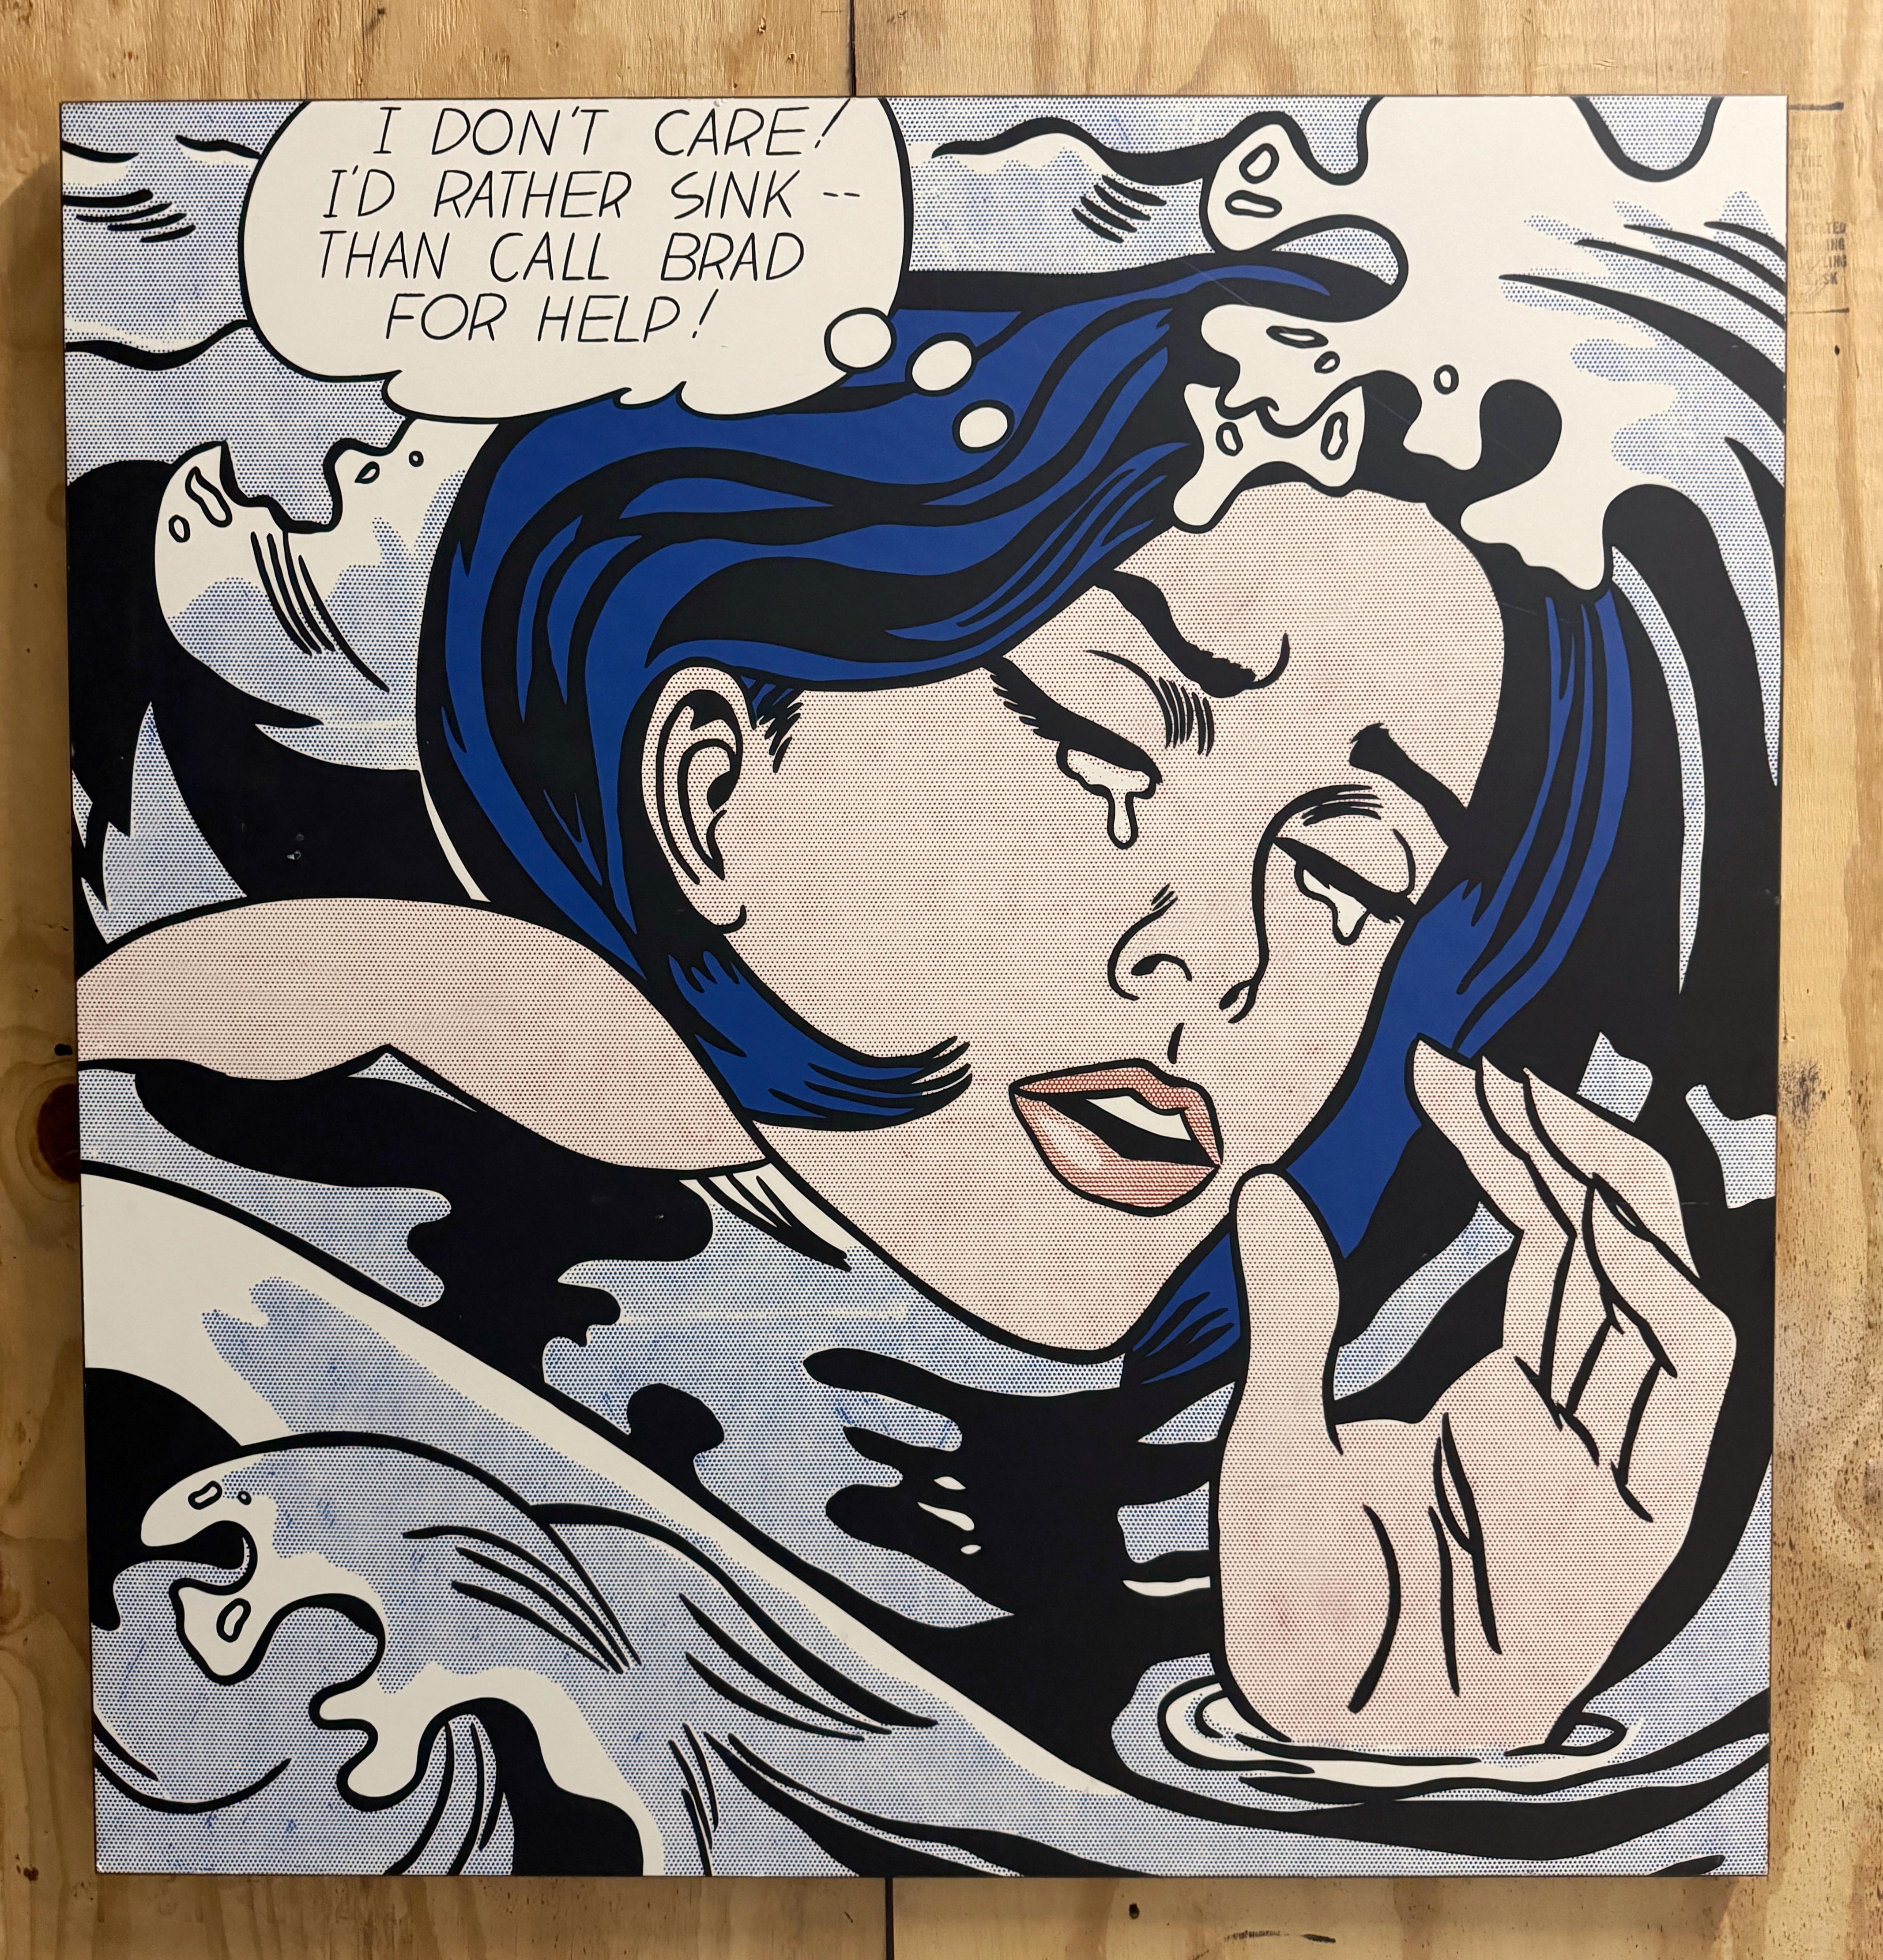 Large 'Drowning Girl’ After Roy Lichtenstein Offset Lithograph Mounted On Panel
USA, Later 20th Century 

'Drowning Girl' after Roy Lichtenstein Offset Lithograph Mounted On Panel is a stunning testament to the iconic artist's mastery of pop art.